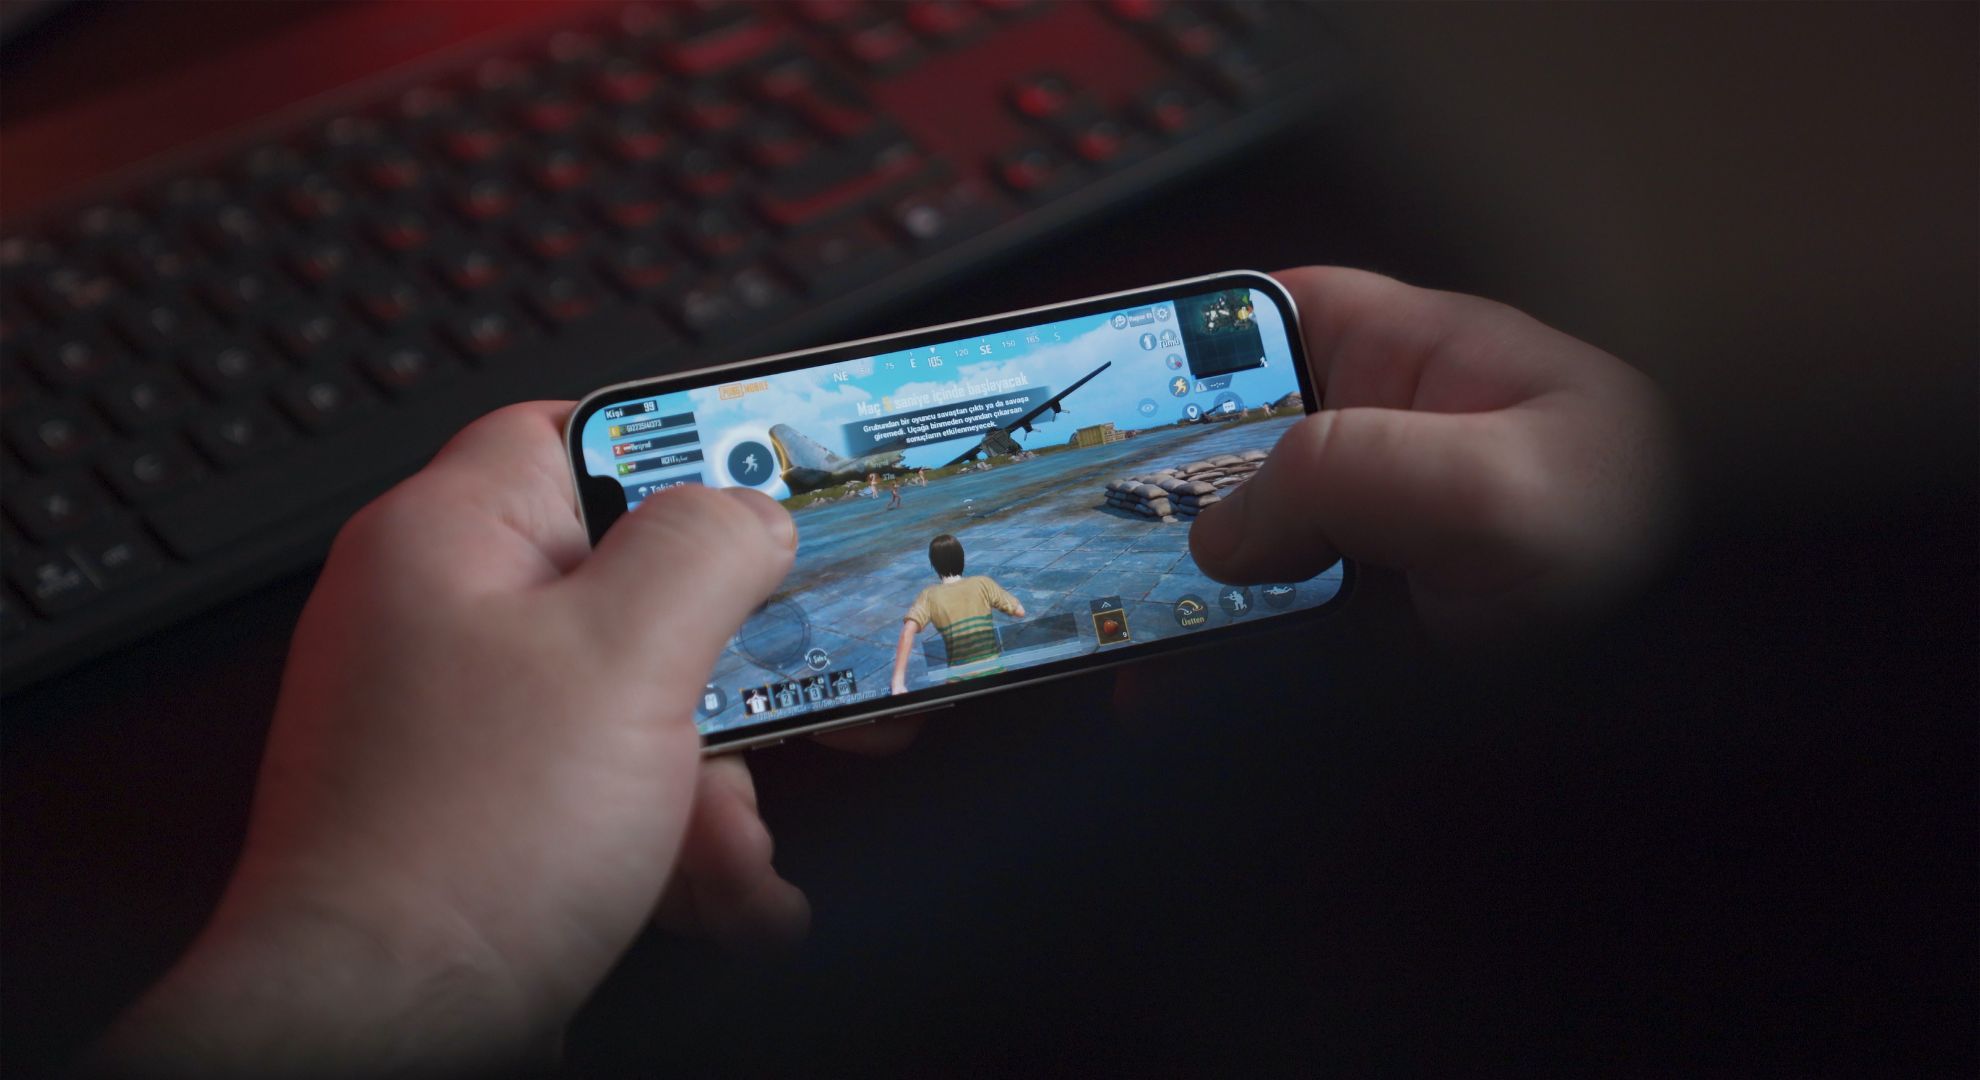 Top Android Games For High-End Phones